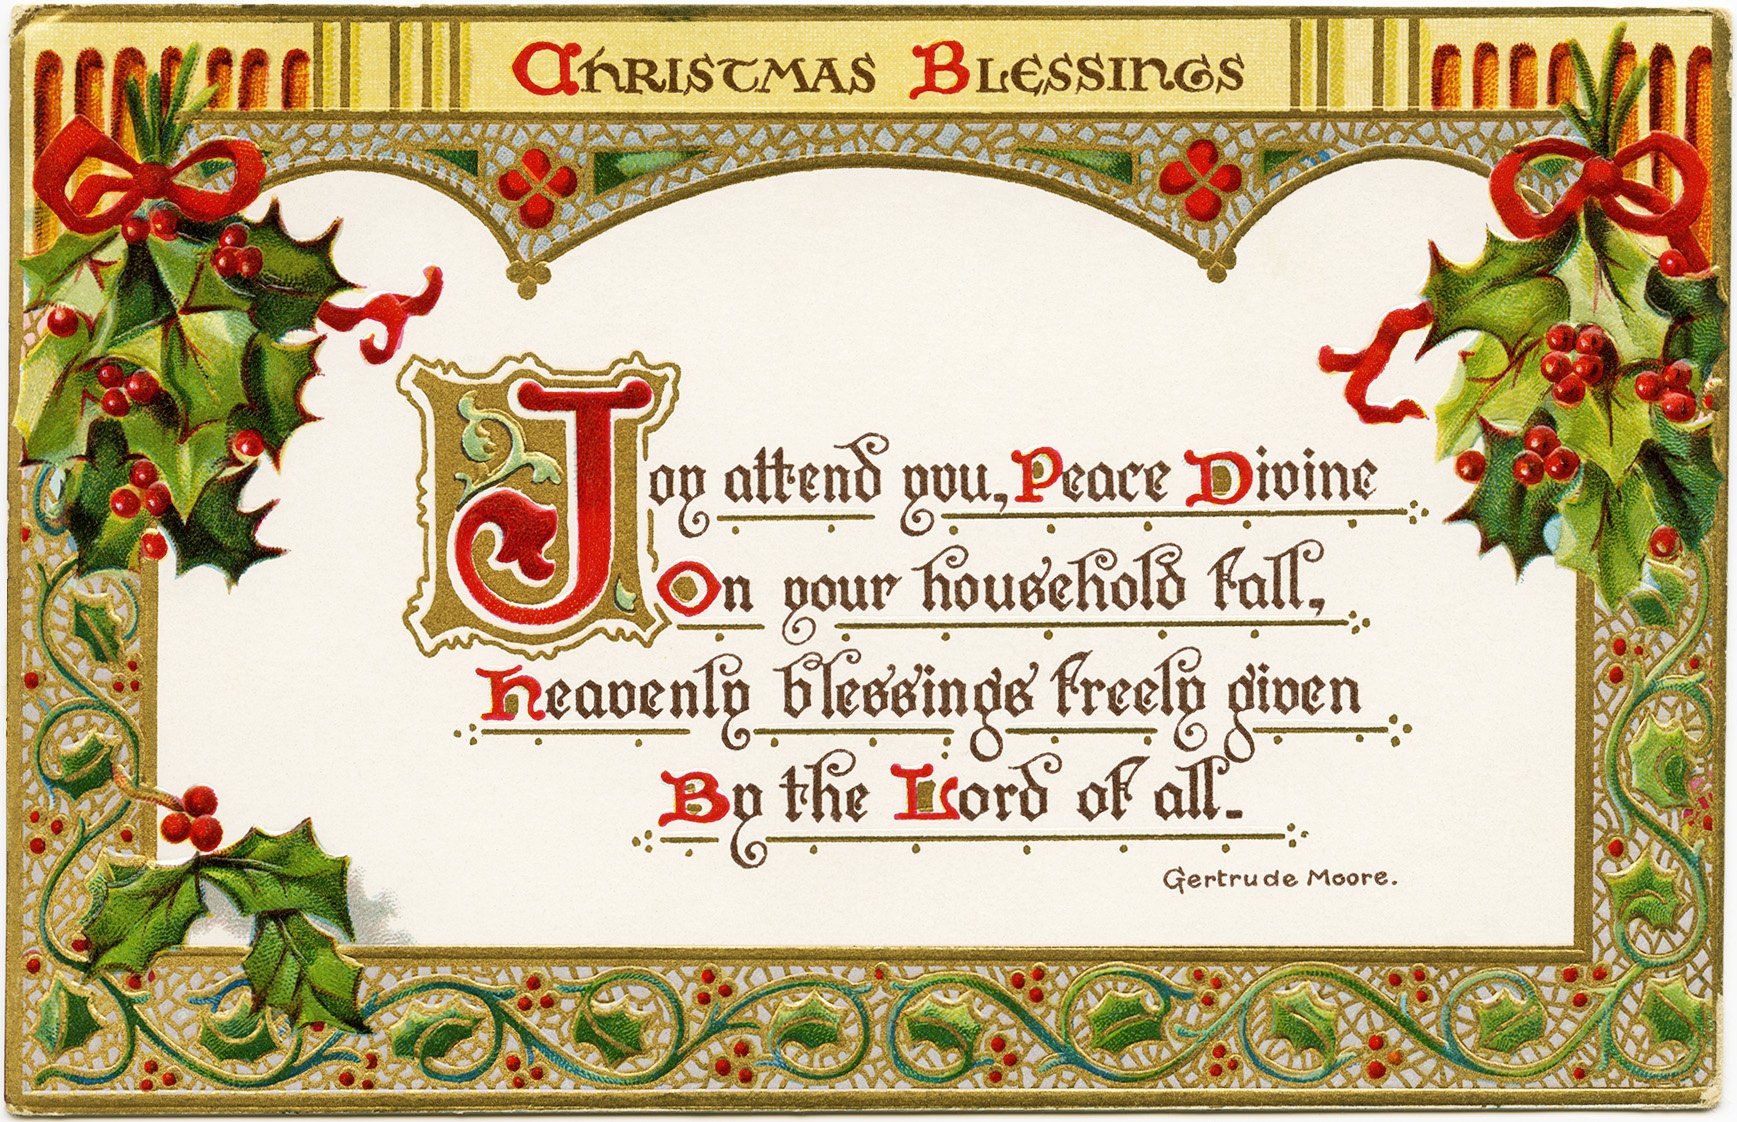 Christmas Blessings ~ Free Vintage Postcard Graphic - Old Design - Free Printable Christian Christmas Greeting Cards